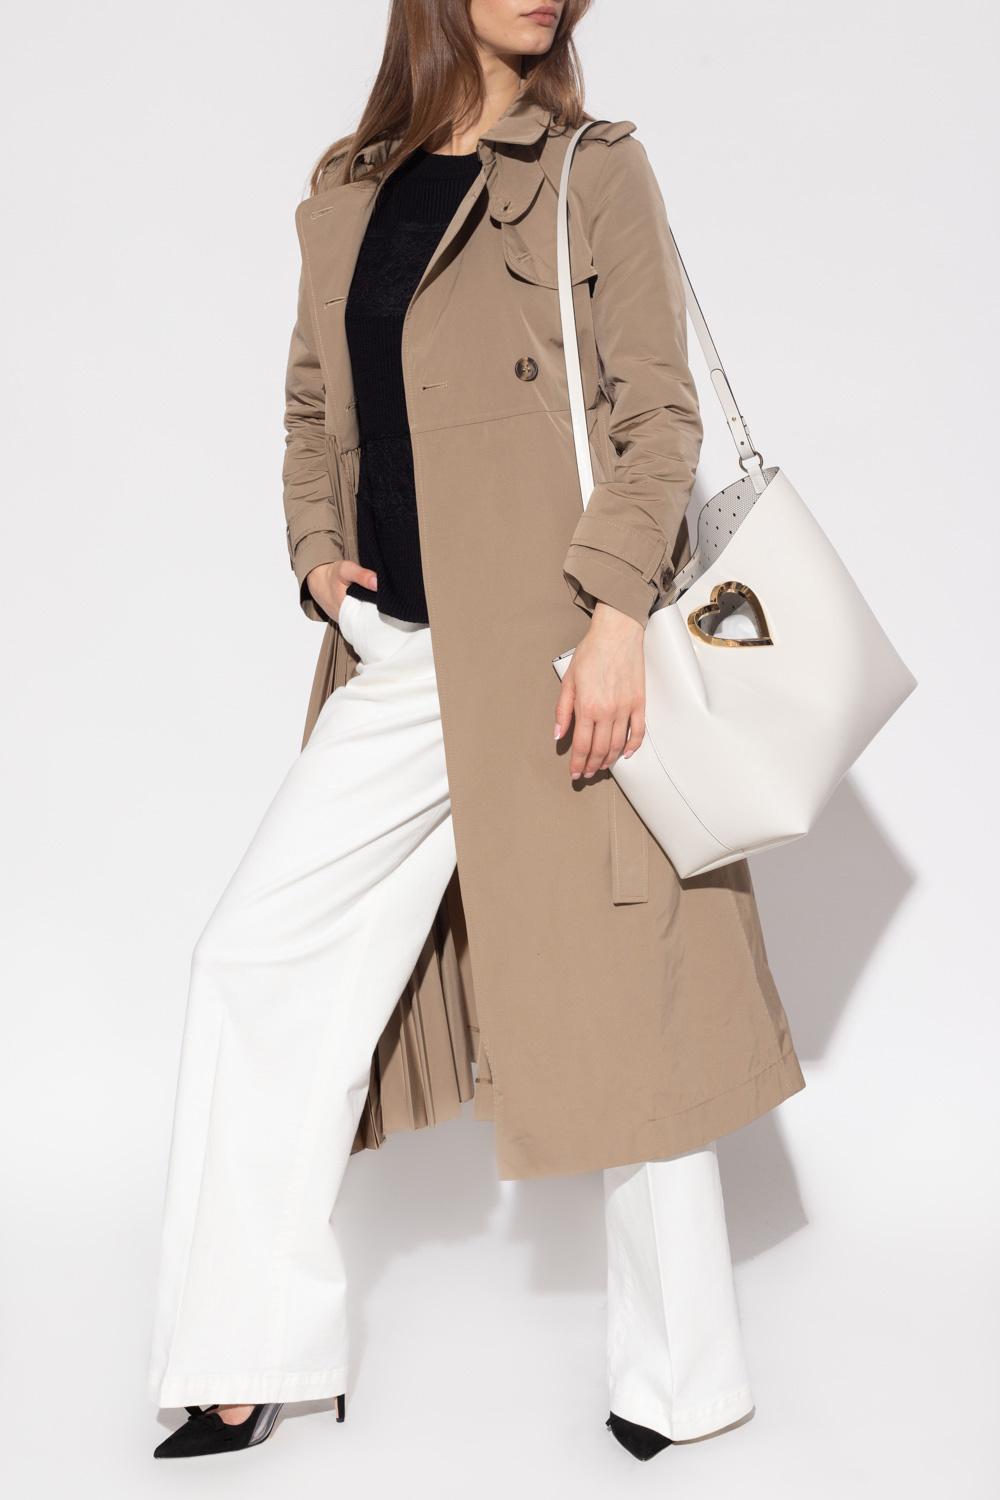 RED Valentino Pleated Trench Coat in Natural | Lyst